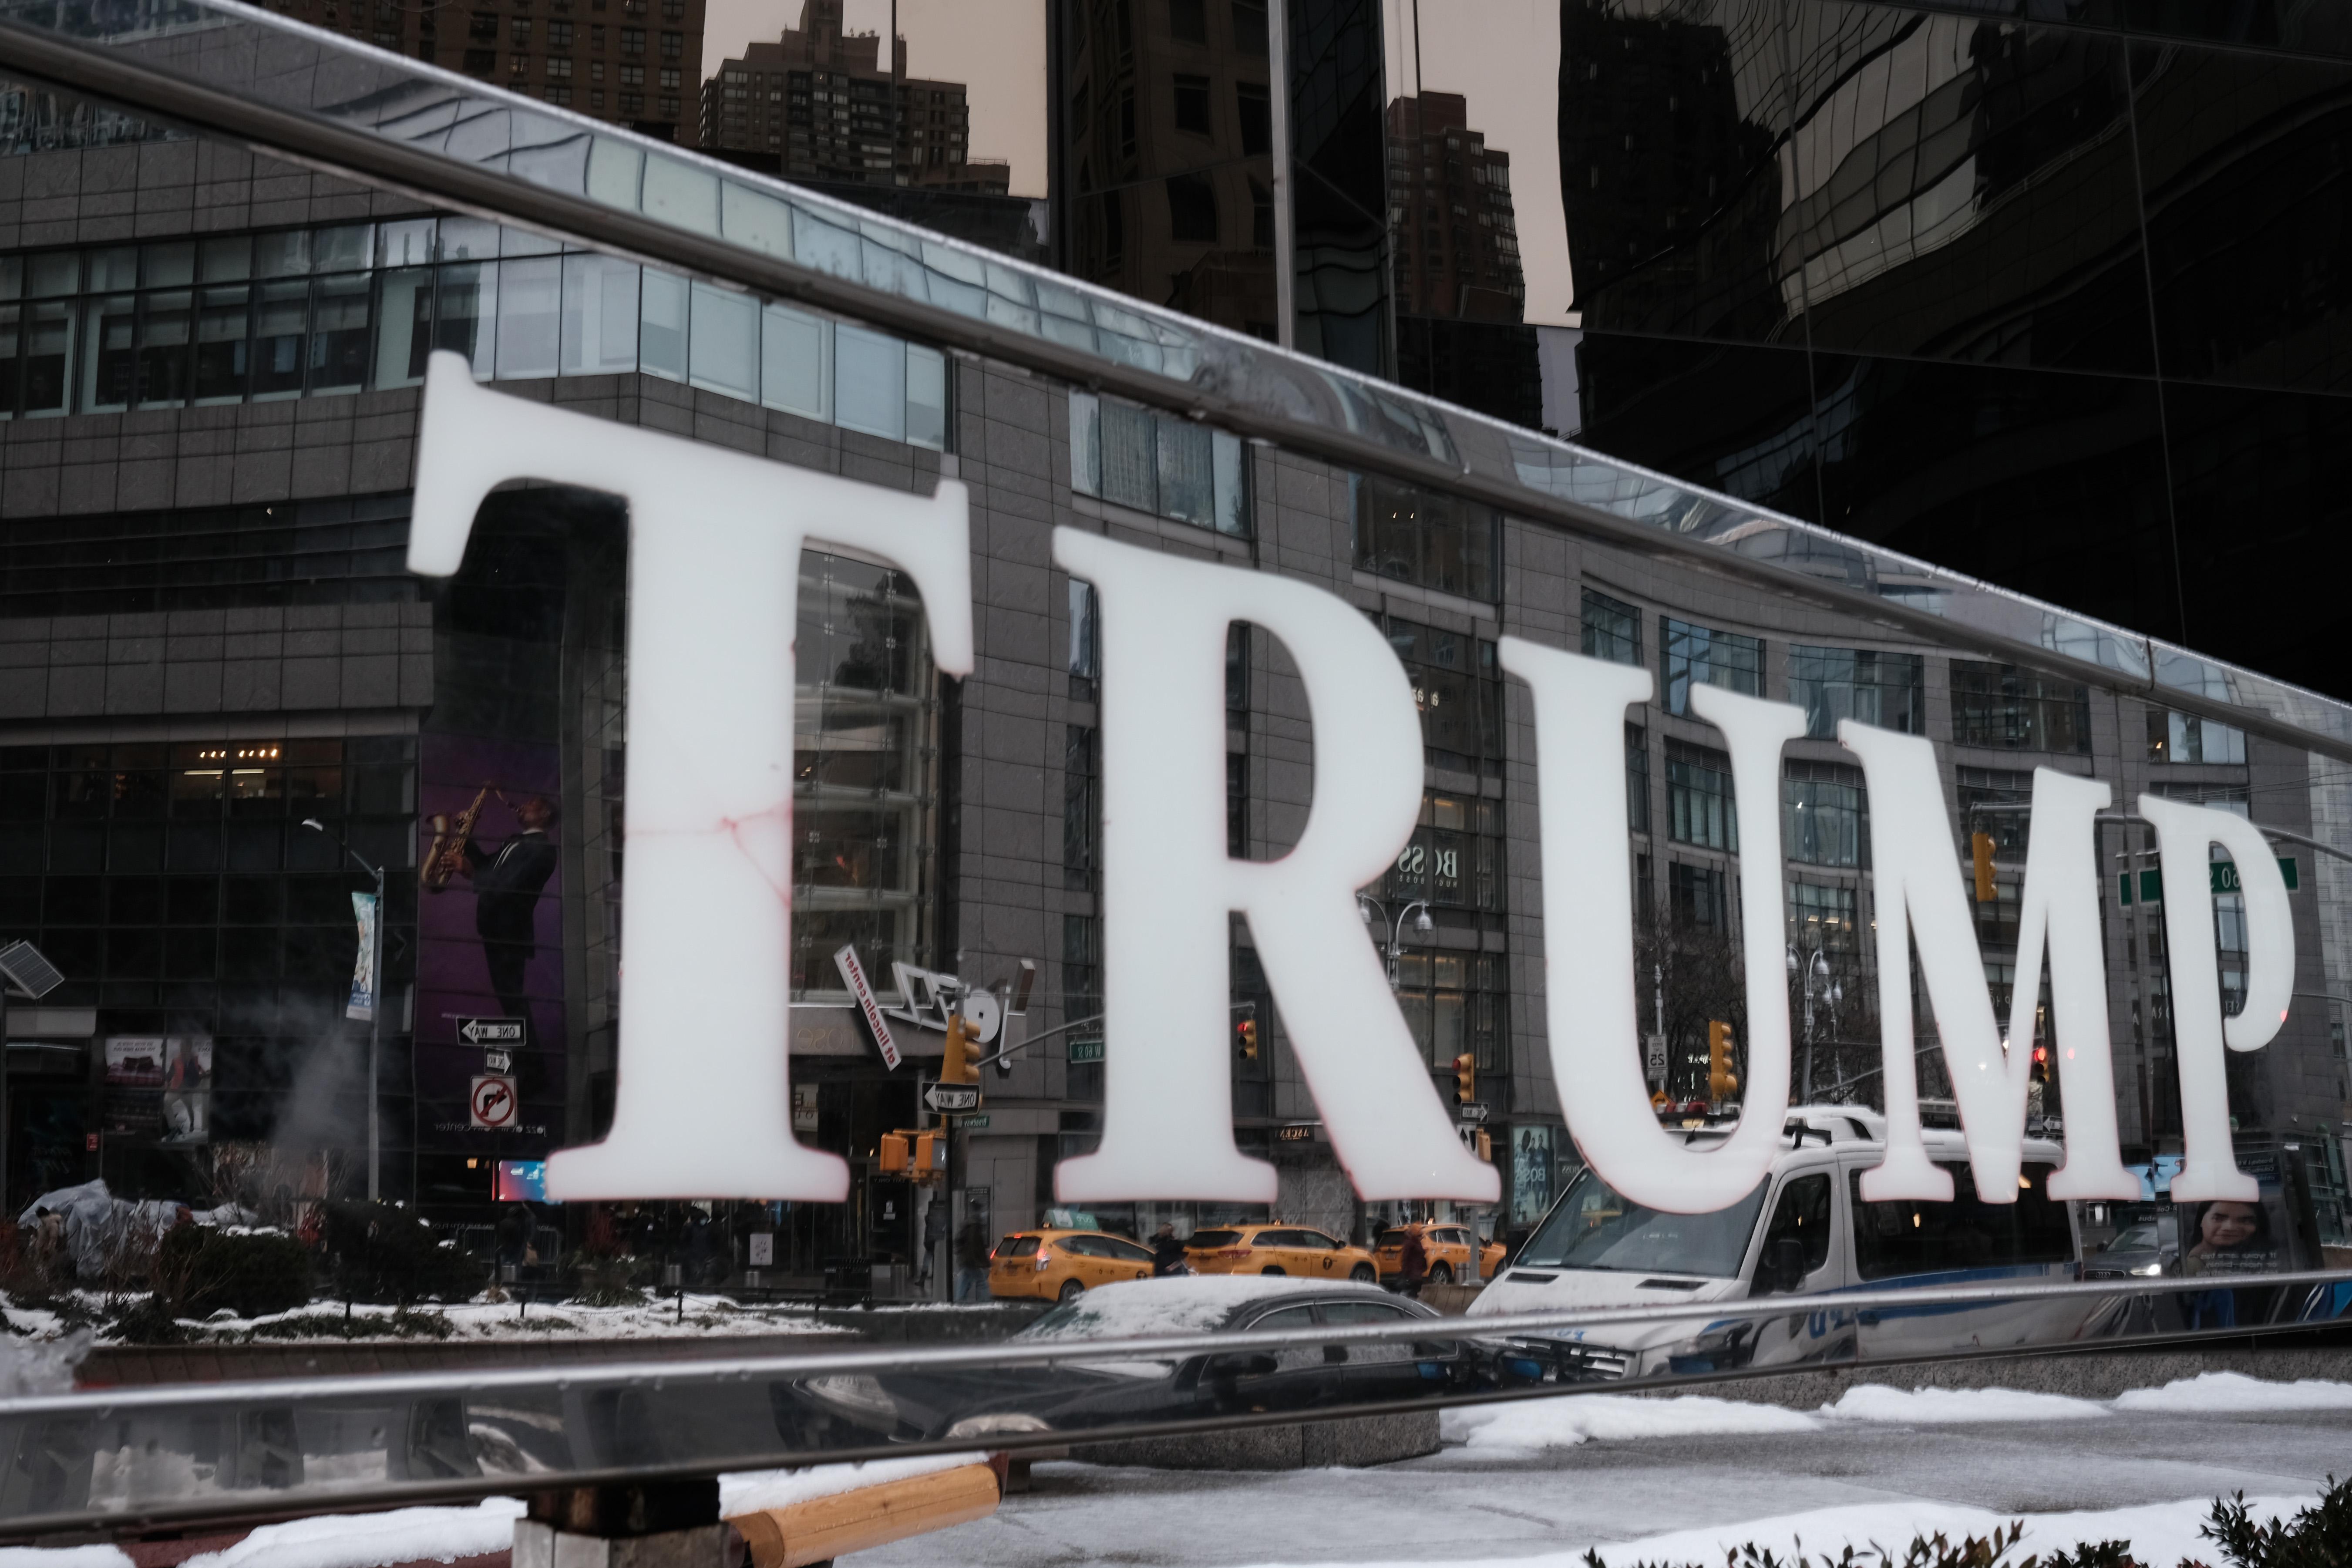 "Trump" in big letters on a mirrored sign reflecting a snowy day in New York